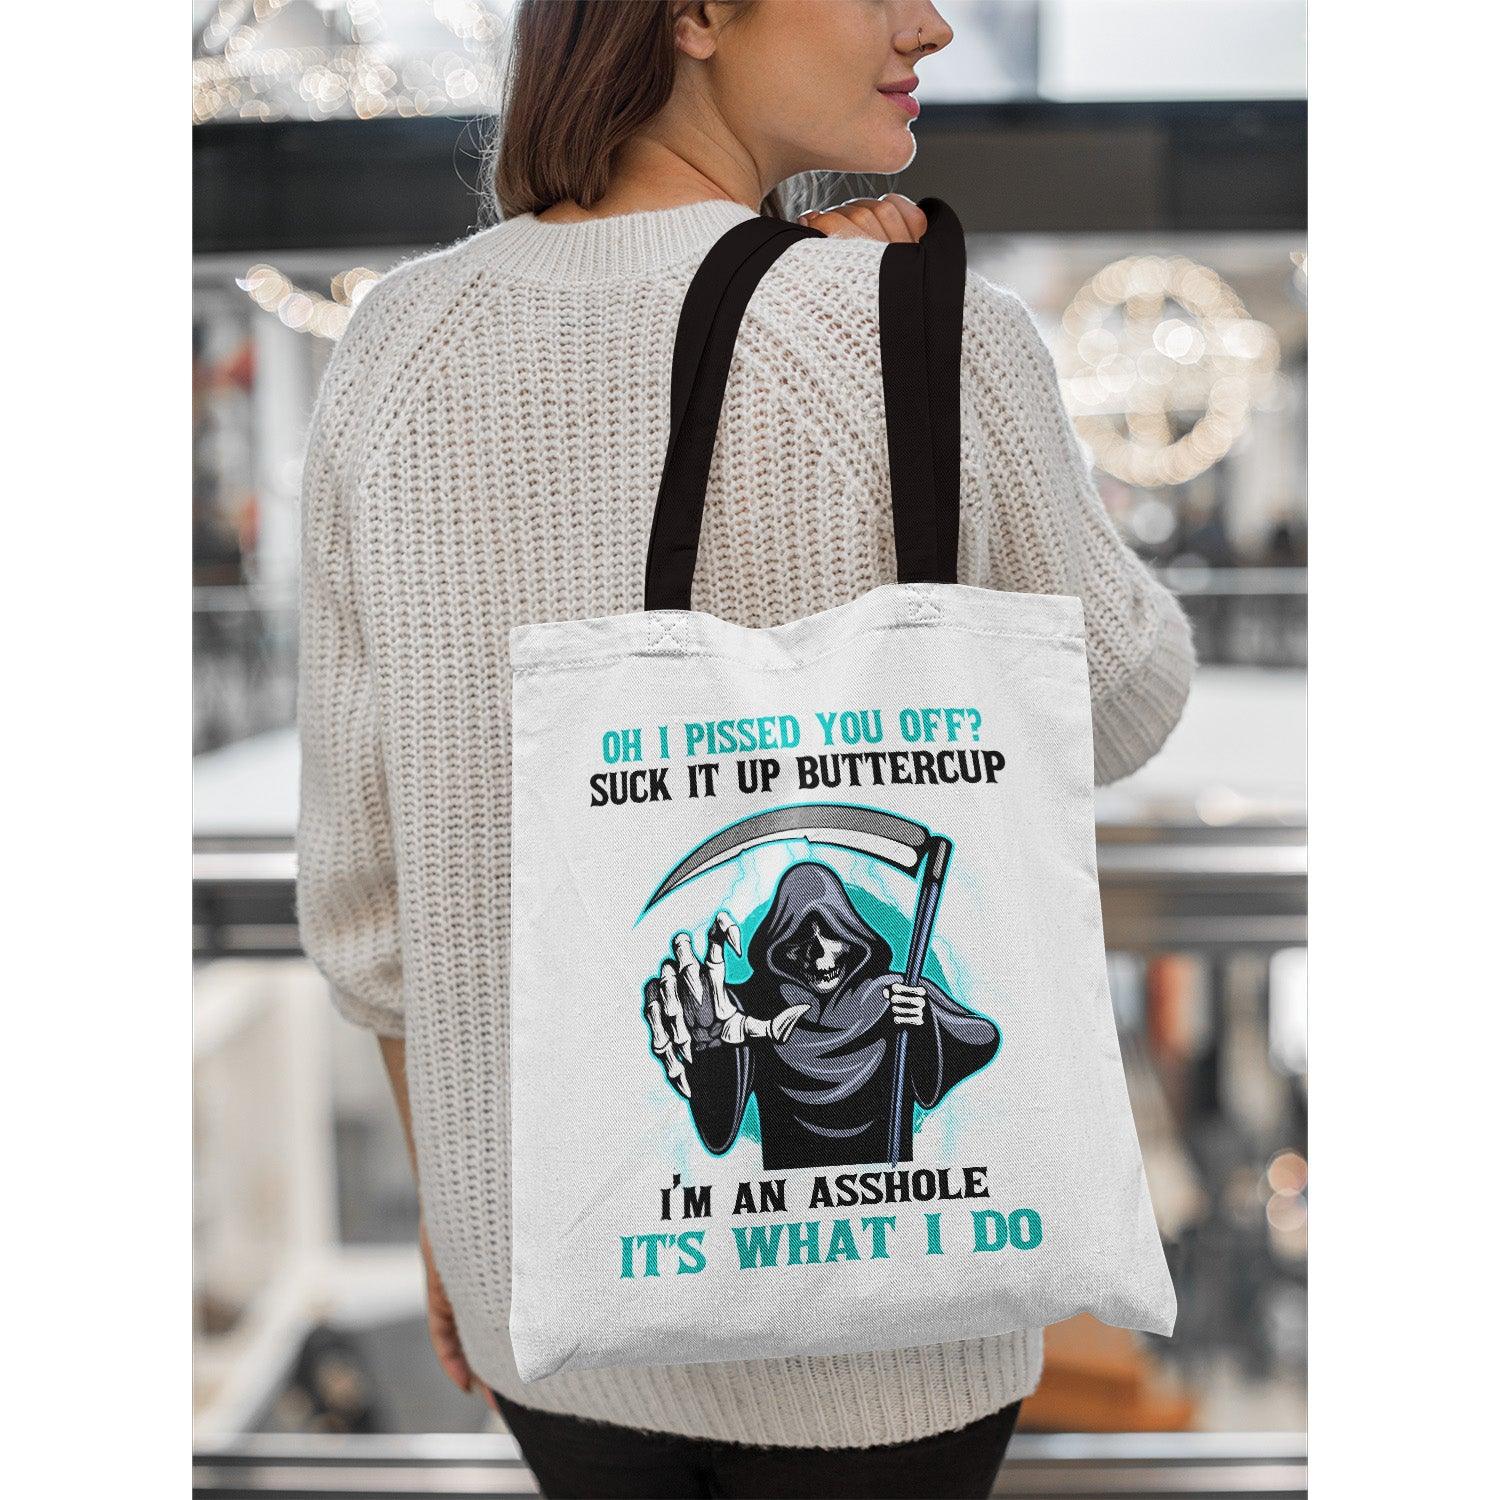 Skull Design Oh Pissed You Off Suck It Up Buttercup Tote Bags White - Wonder Skull